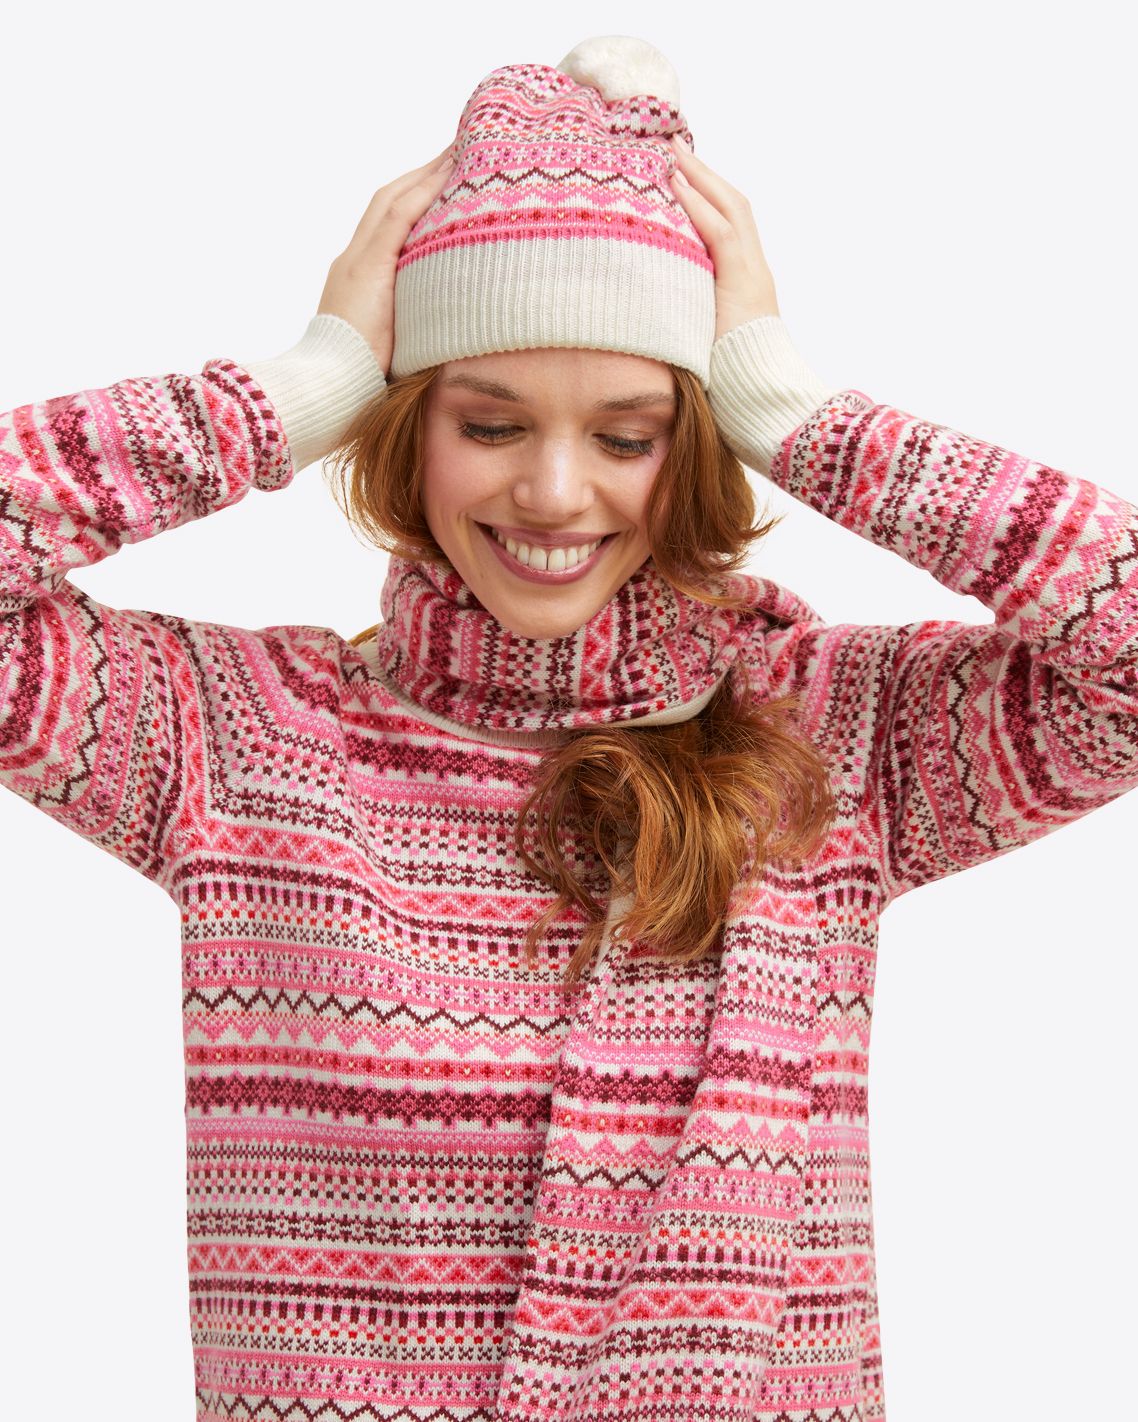 Fairisle Hat with Pom Pom in Pink